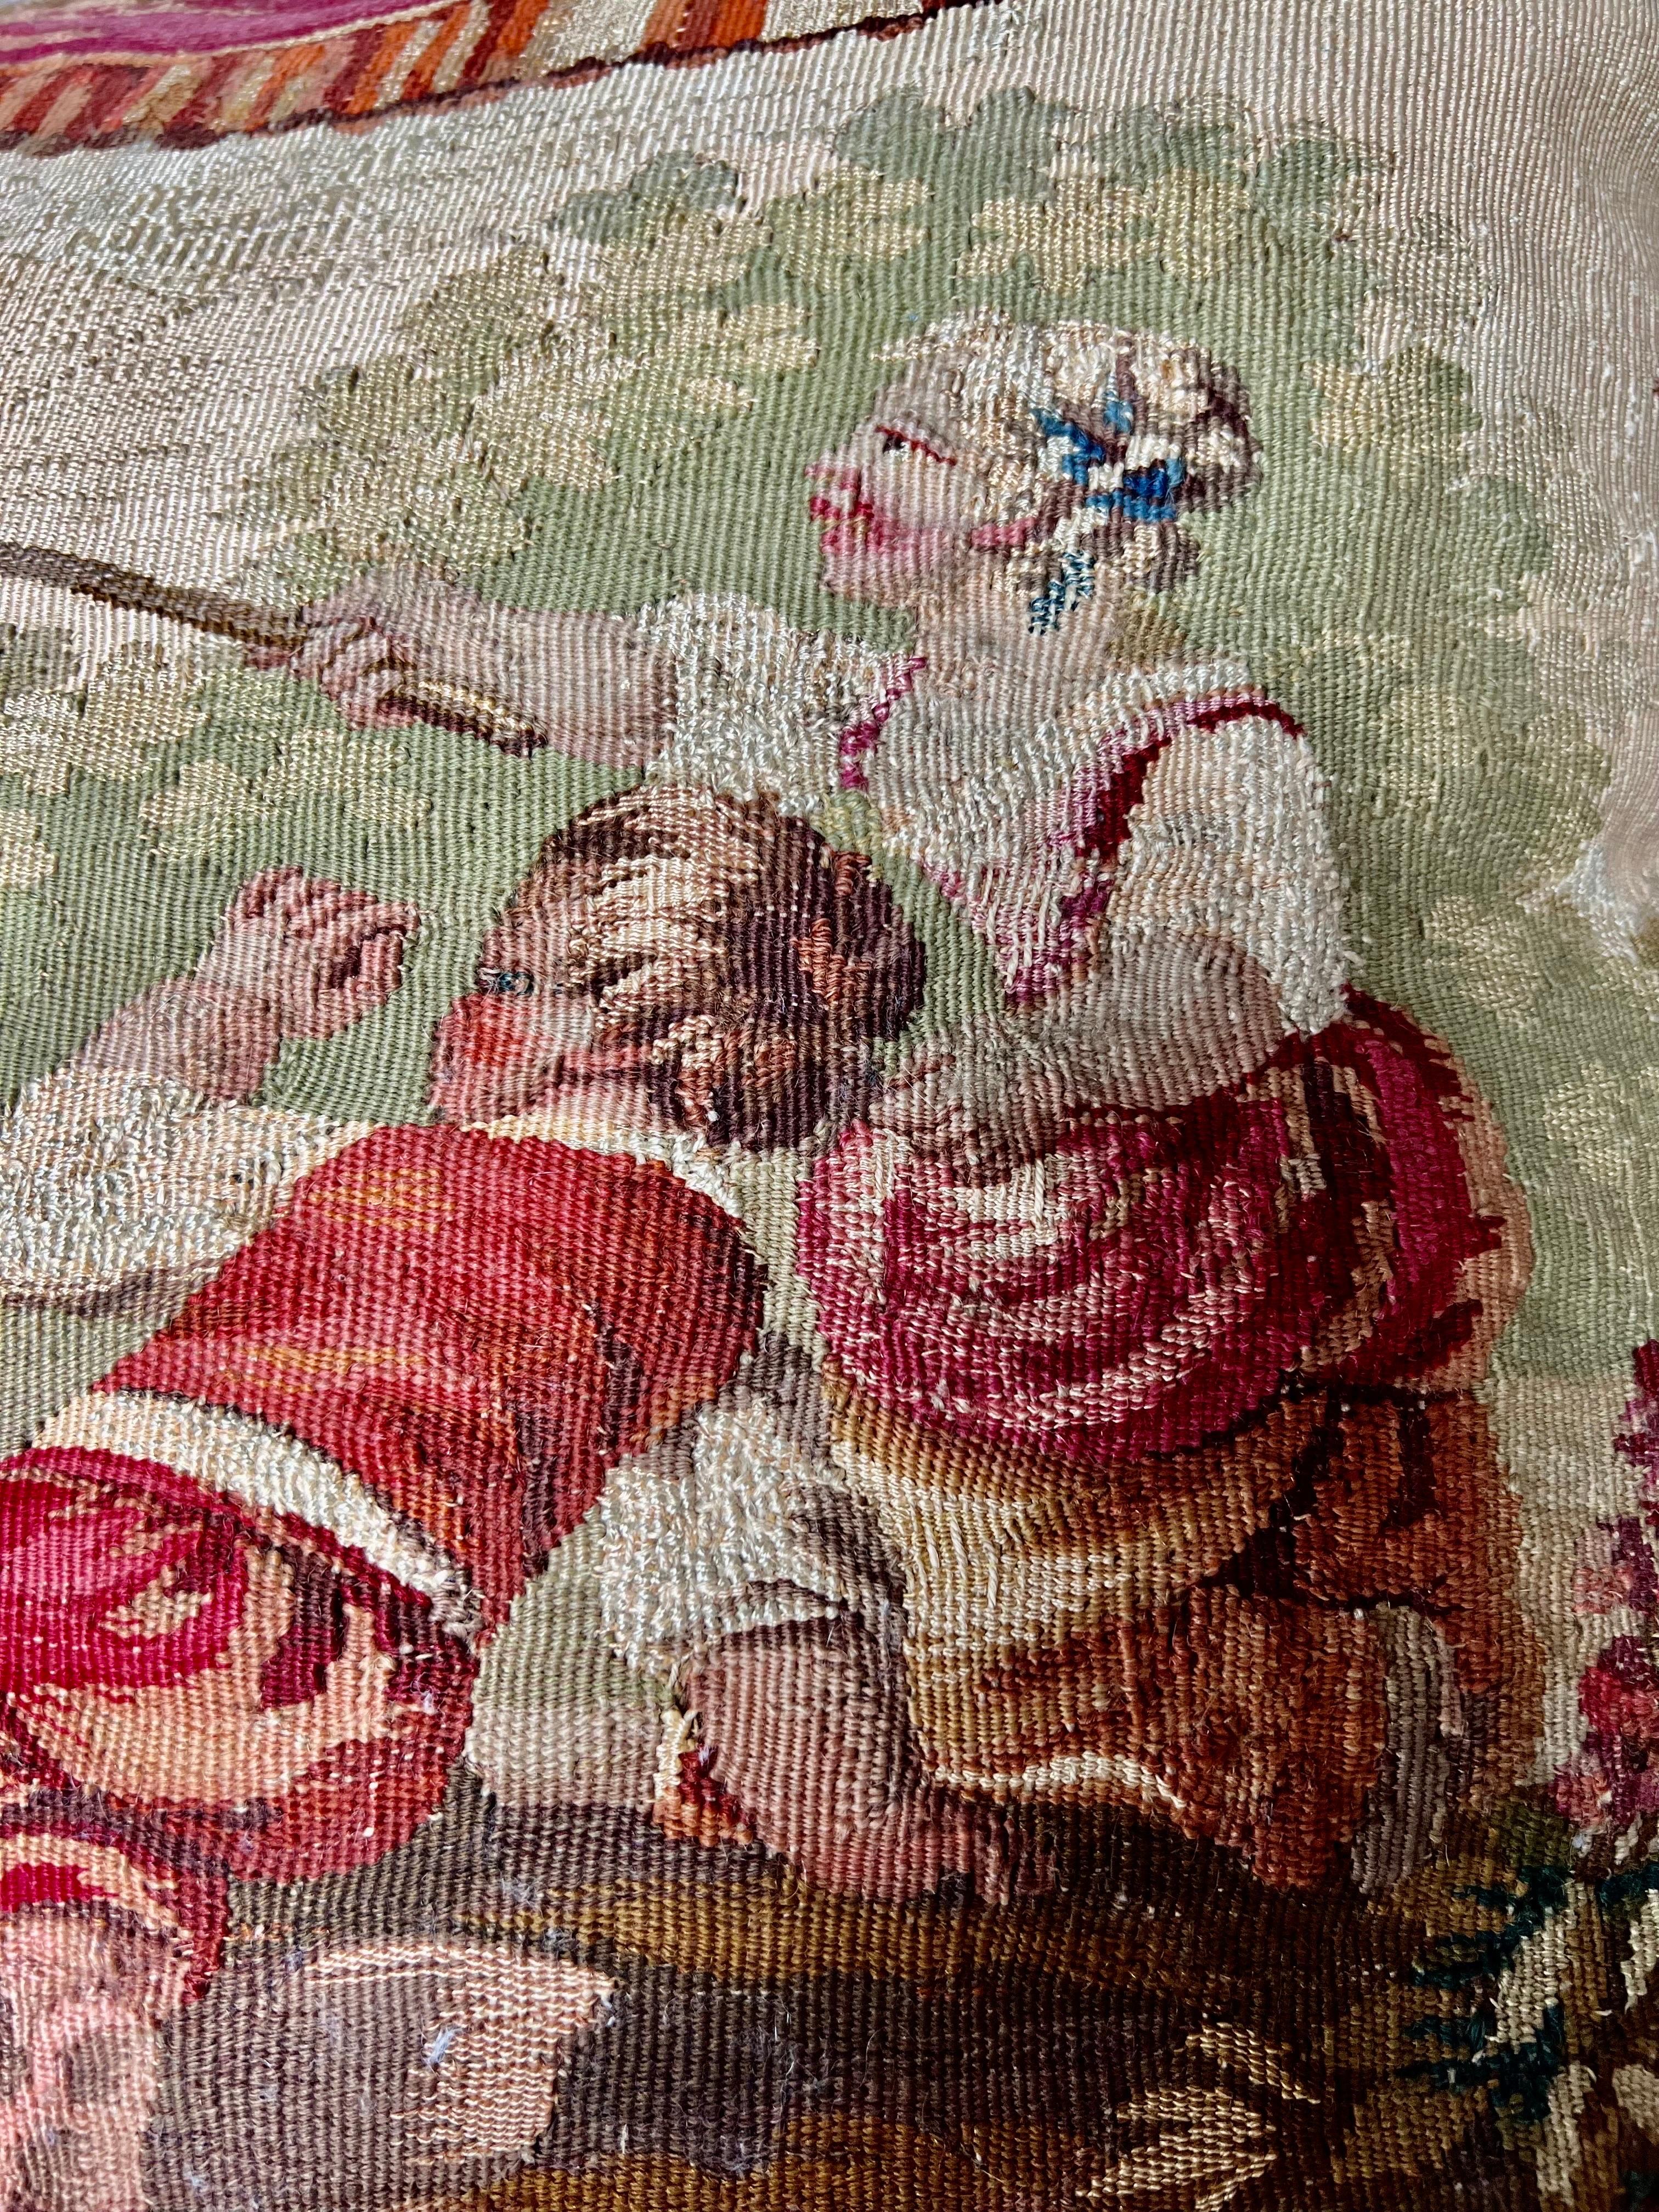 The 19th-century Aubusson bed pillow is a charming piece, depicting a scene of children playing a blindfolded game with a little dog in the background.   The garlands of fabric and tassels create a theatrical touch.  Multicolored fringe on the sides